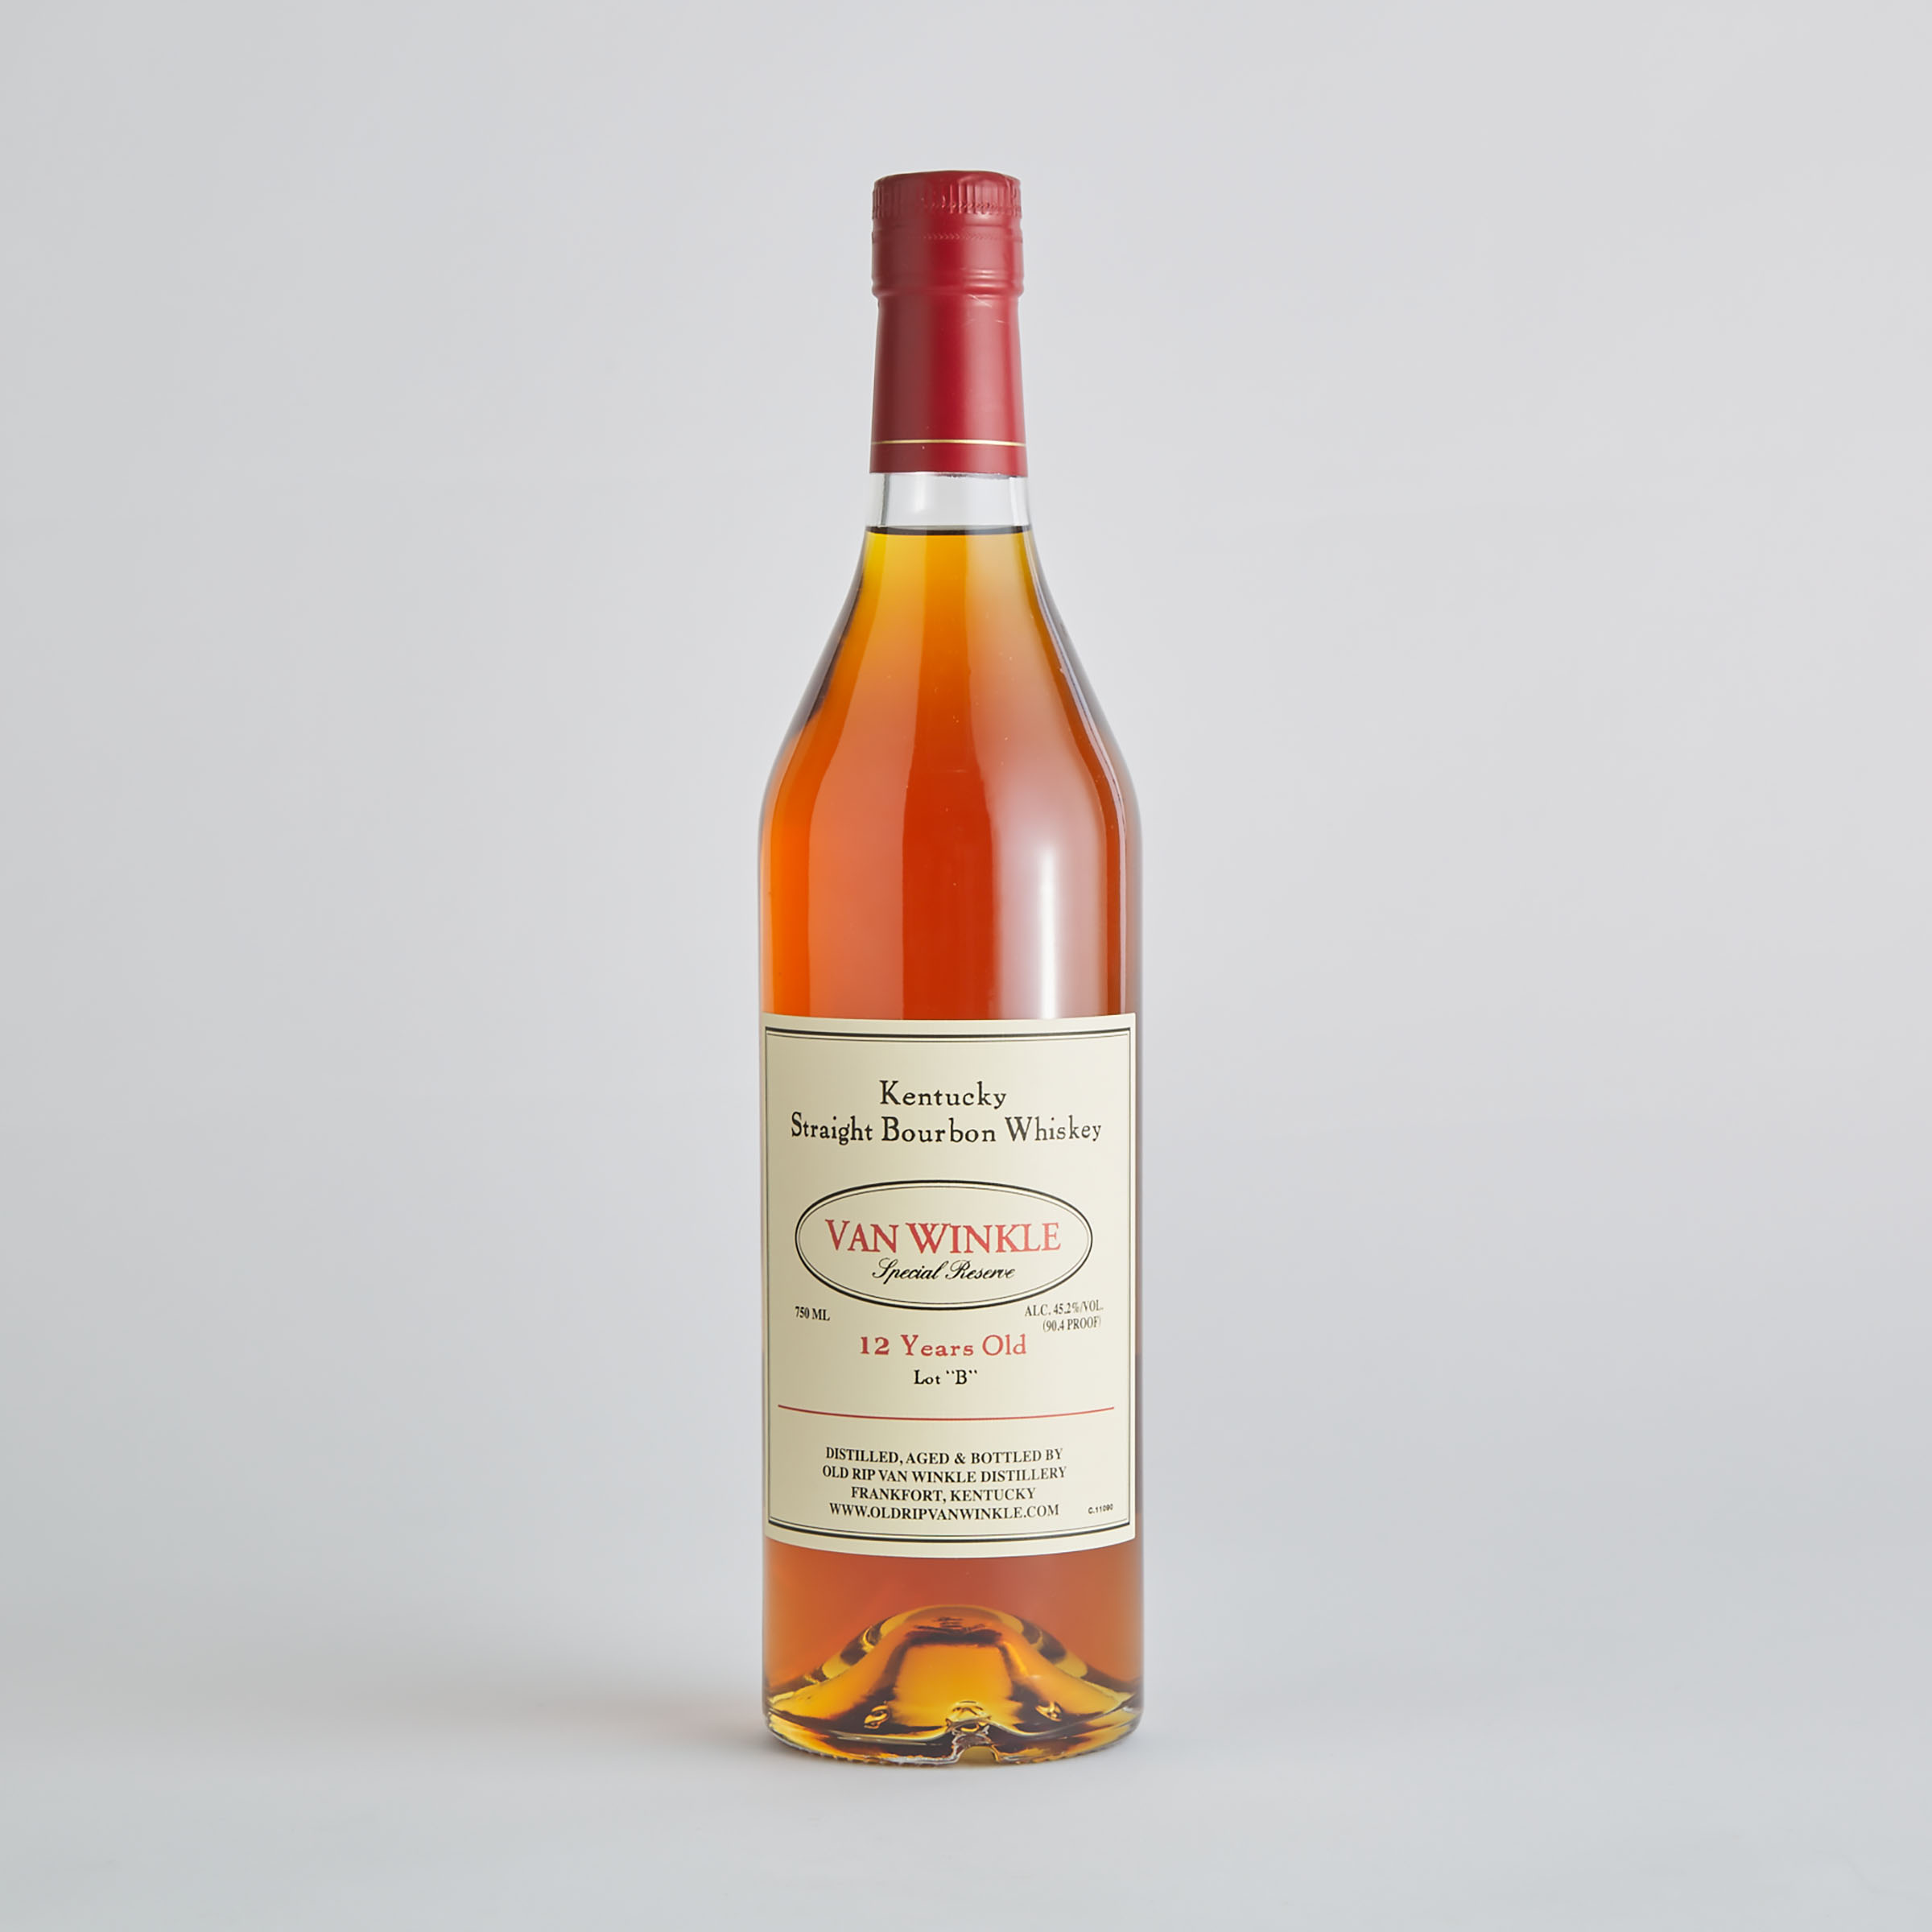 VAN WINKLE SPECIAL RESERVE "LOT B" KENTUCKY STRAIGHT BOURBON WHISKEY 12 YEARS (ONE 750 ML)